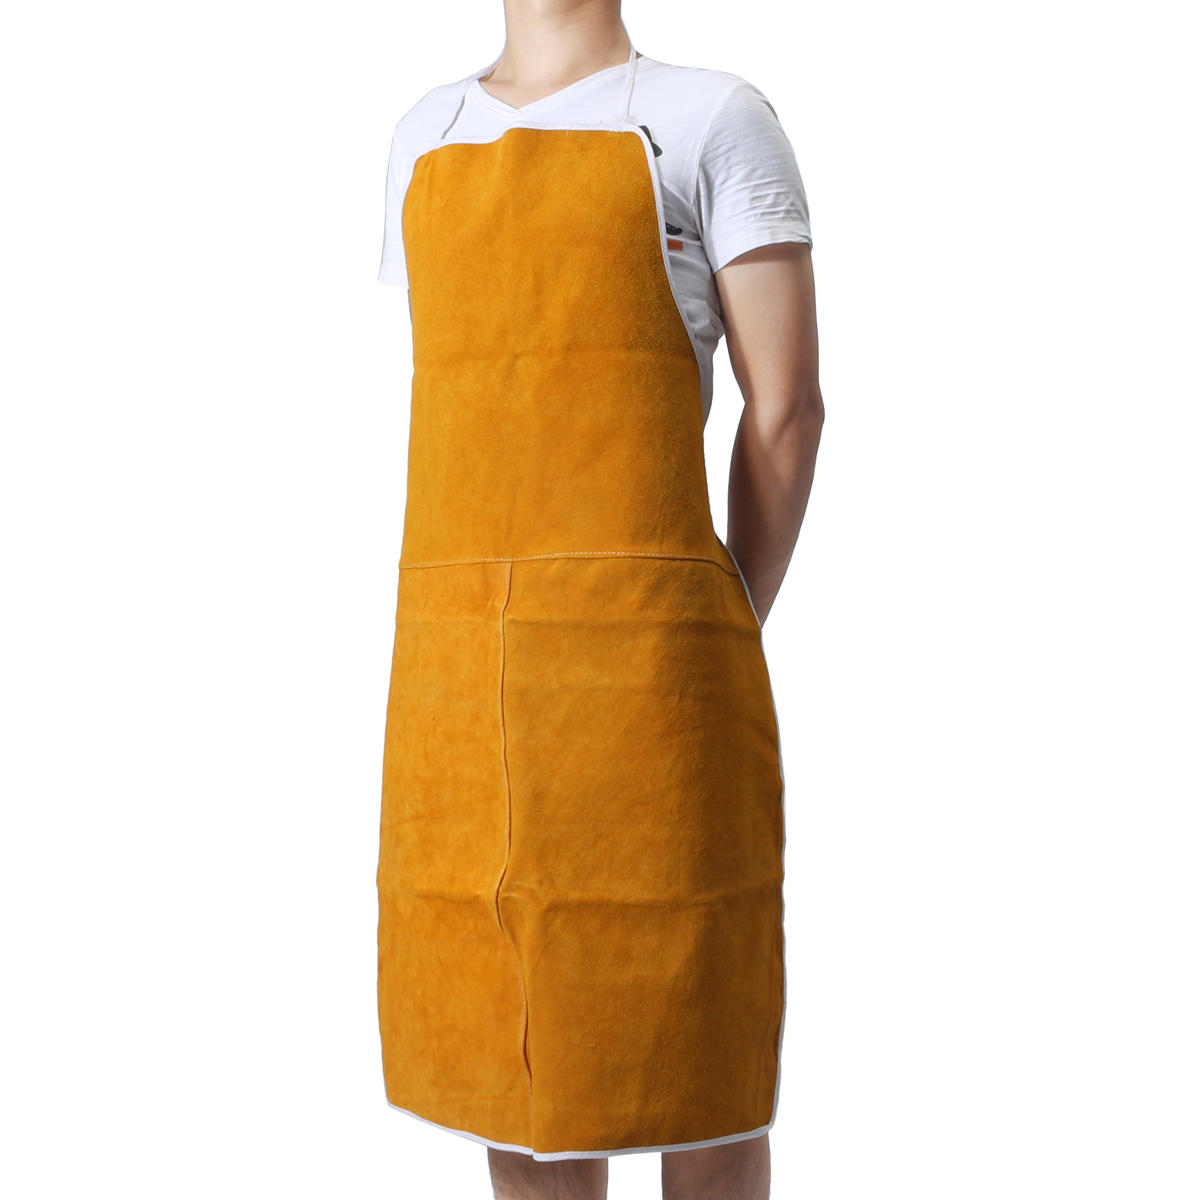 Cow Leather Welder Aprons Welding Heat Insulation Protection Apron Blacksmith US